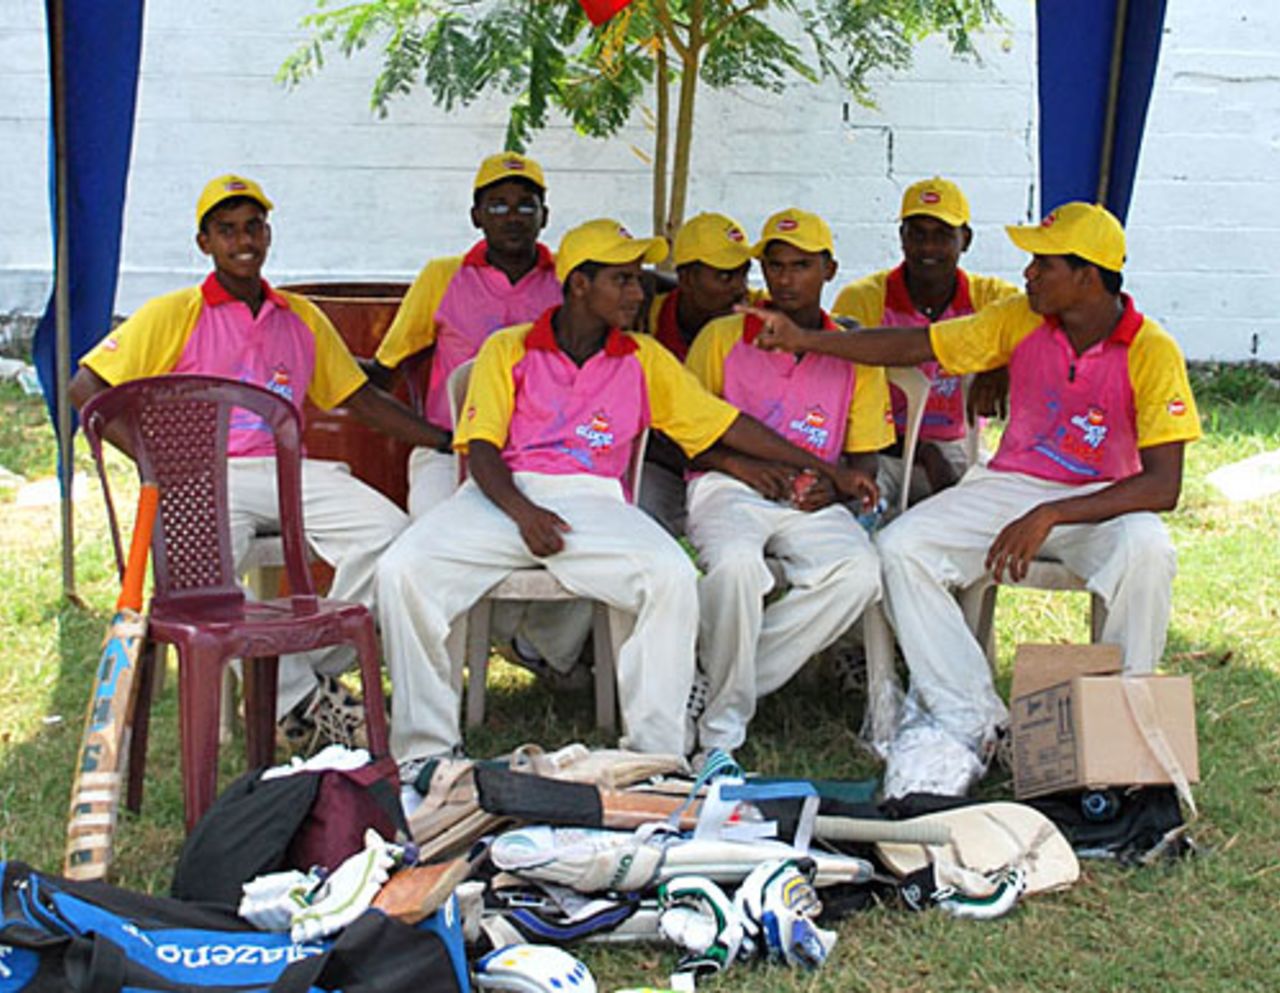 Jaffna players watch the match, Glucofit Cricket Sixes, Colombo, October 17, 2009